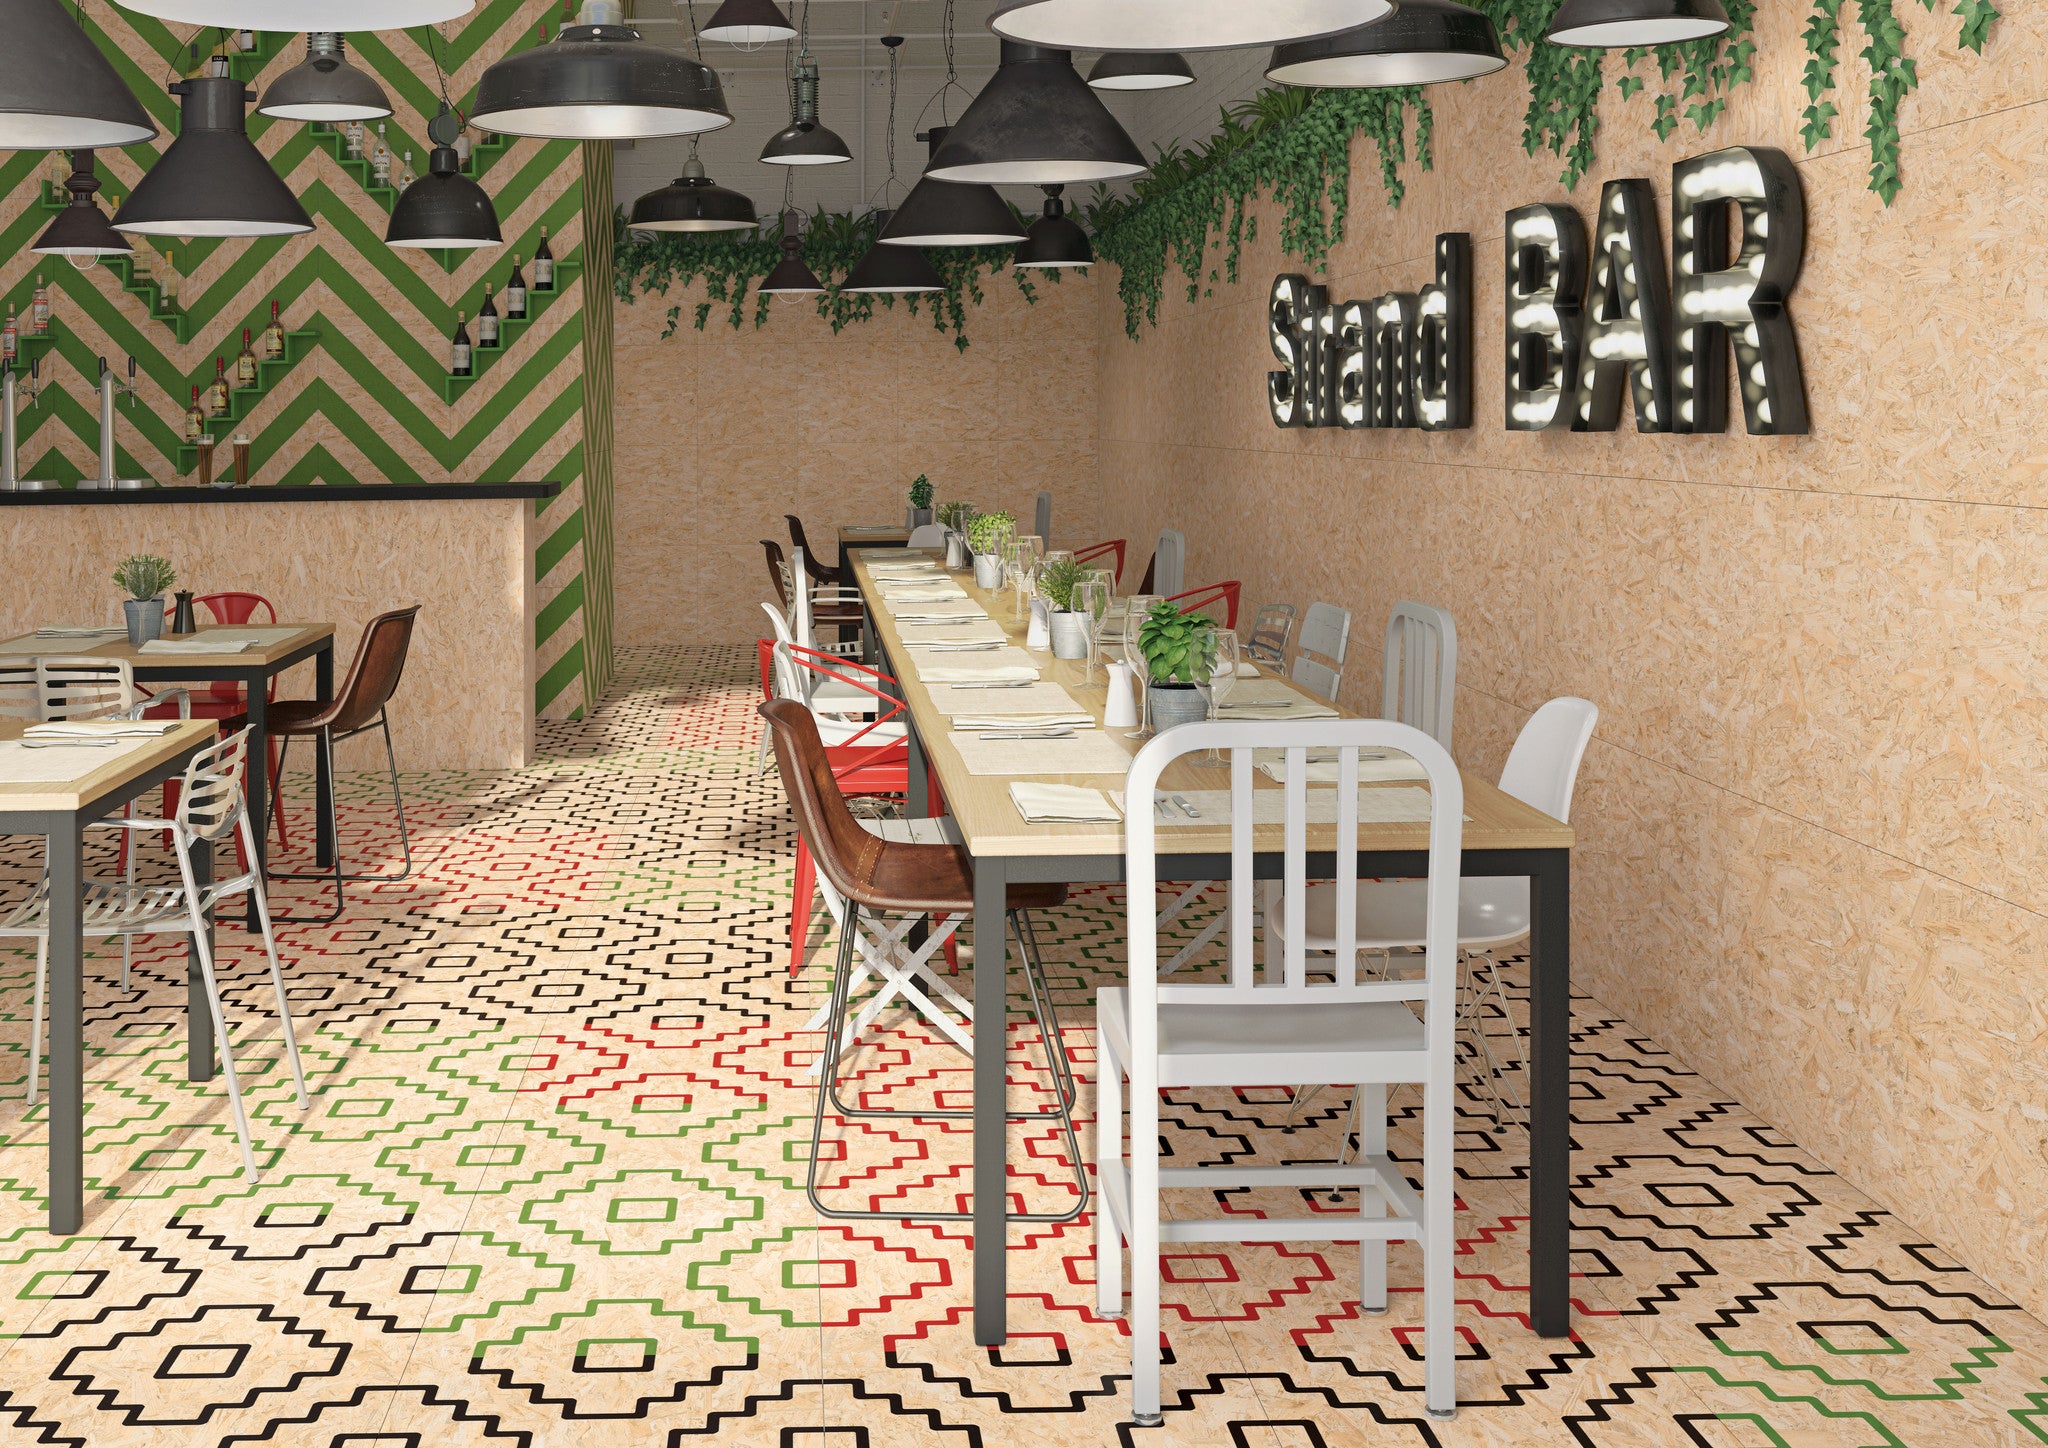 Chipboard Tiles in Cafe